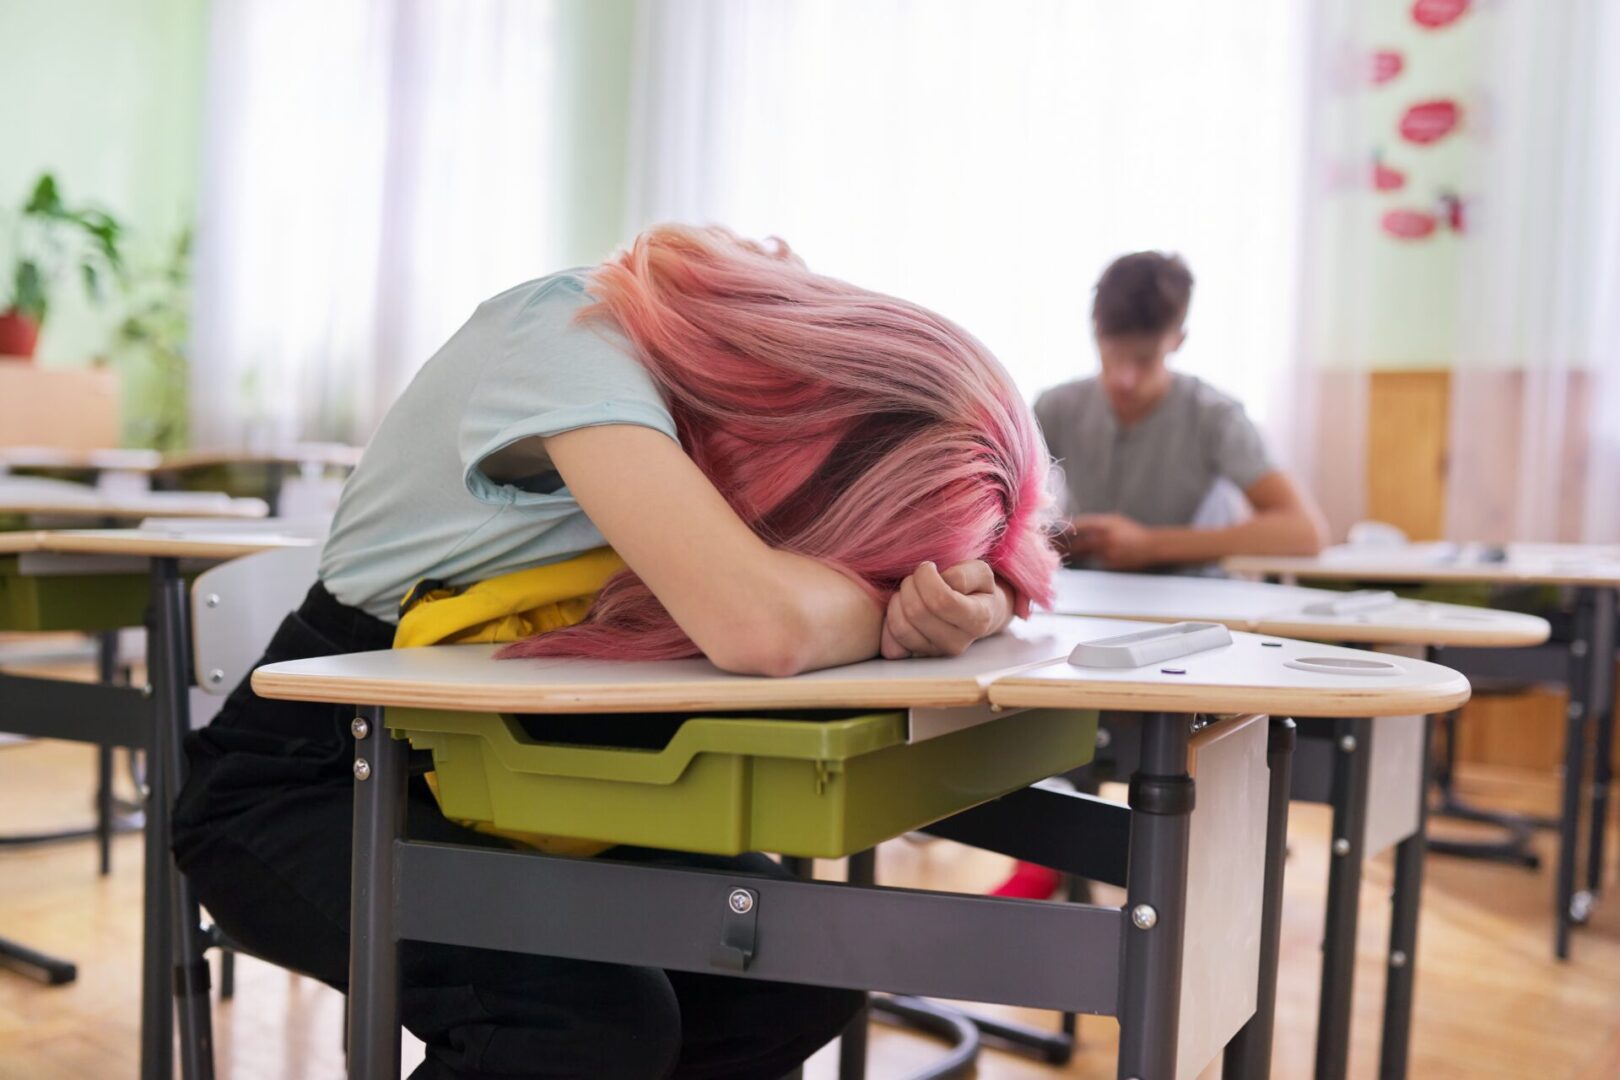 Tired teenage student asleep on her desk. Girl put her head on a backpack, classroom background